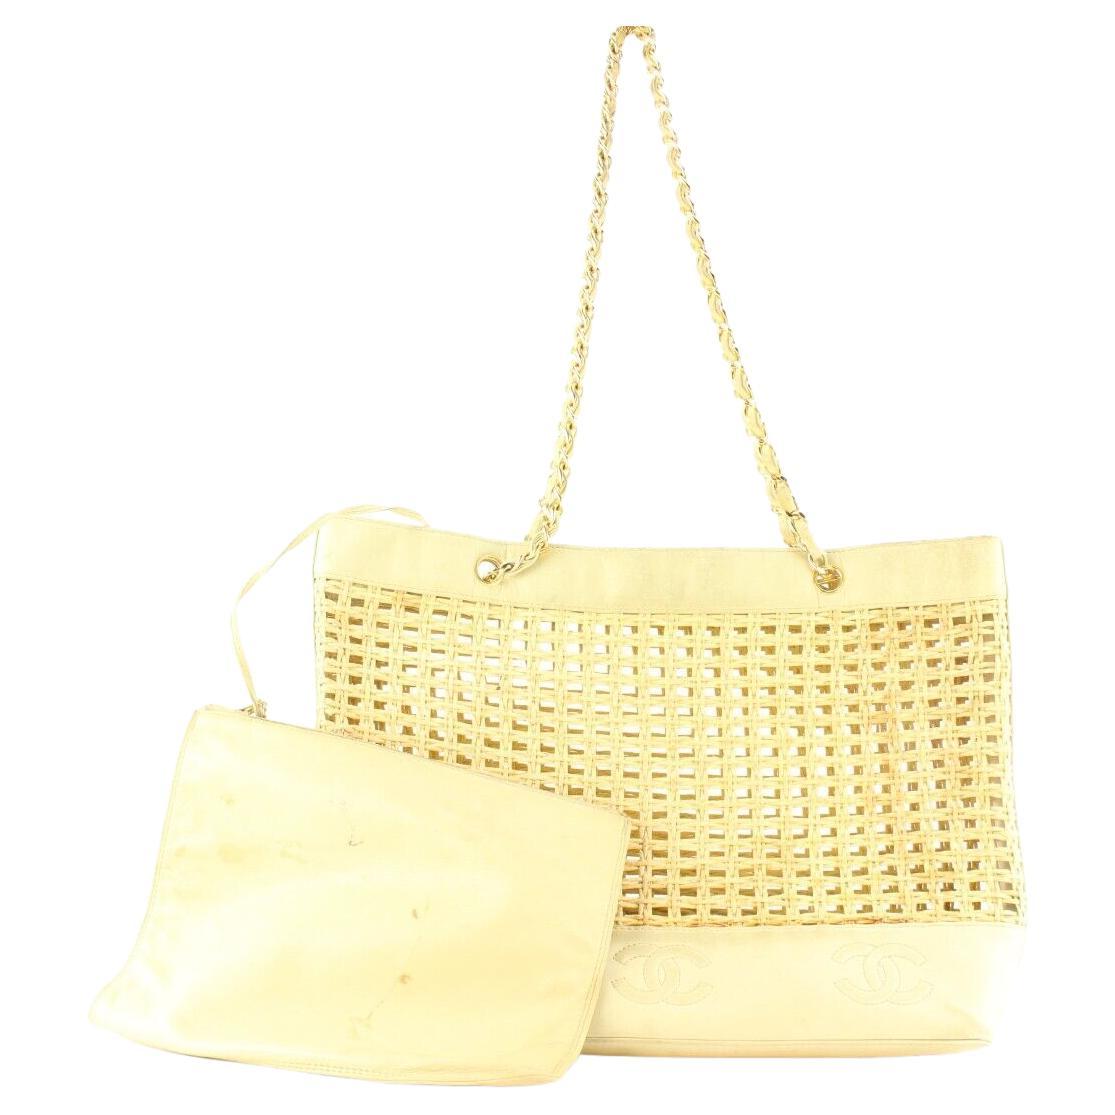 Chanel Mustard Yellow Caviar Leather Timeless CC Chain Tote Bag